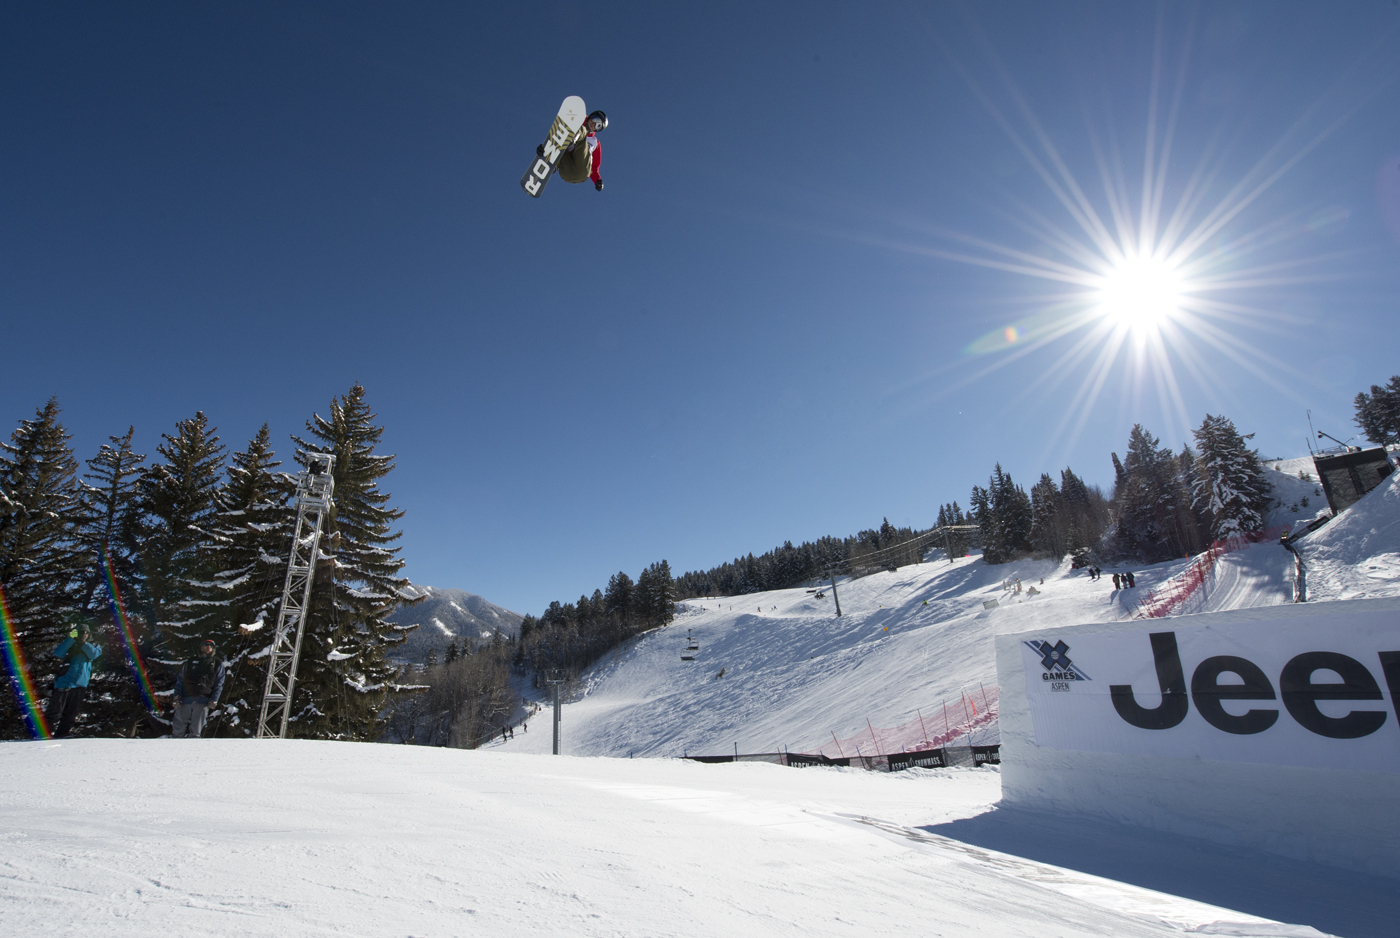 Monster Energy's Ståle Sandbech Will Compete in Snowboard Big Air and Snowboard Slopestyle at X Games Norway 2020